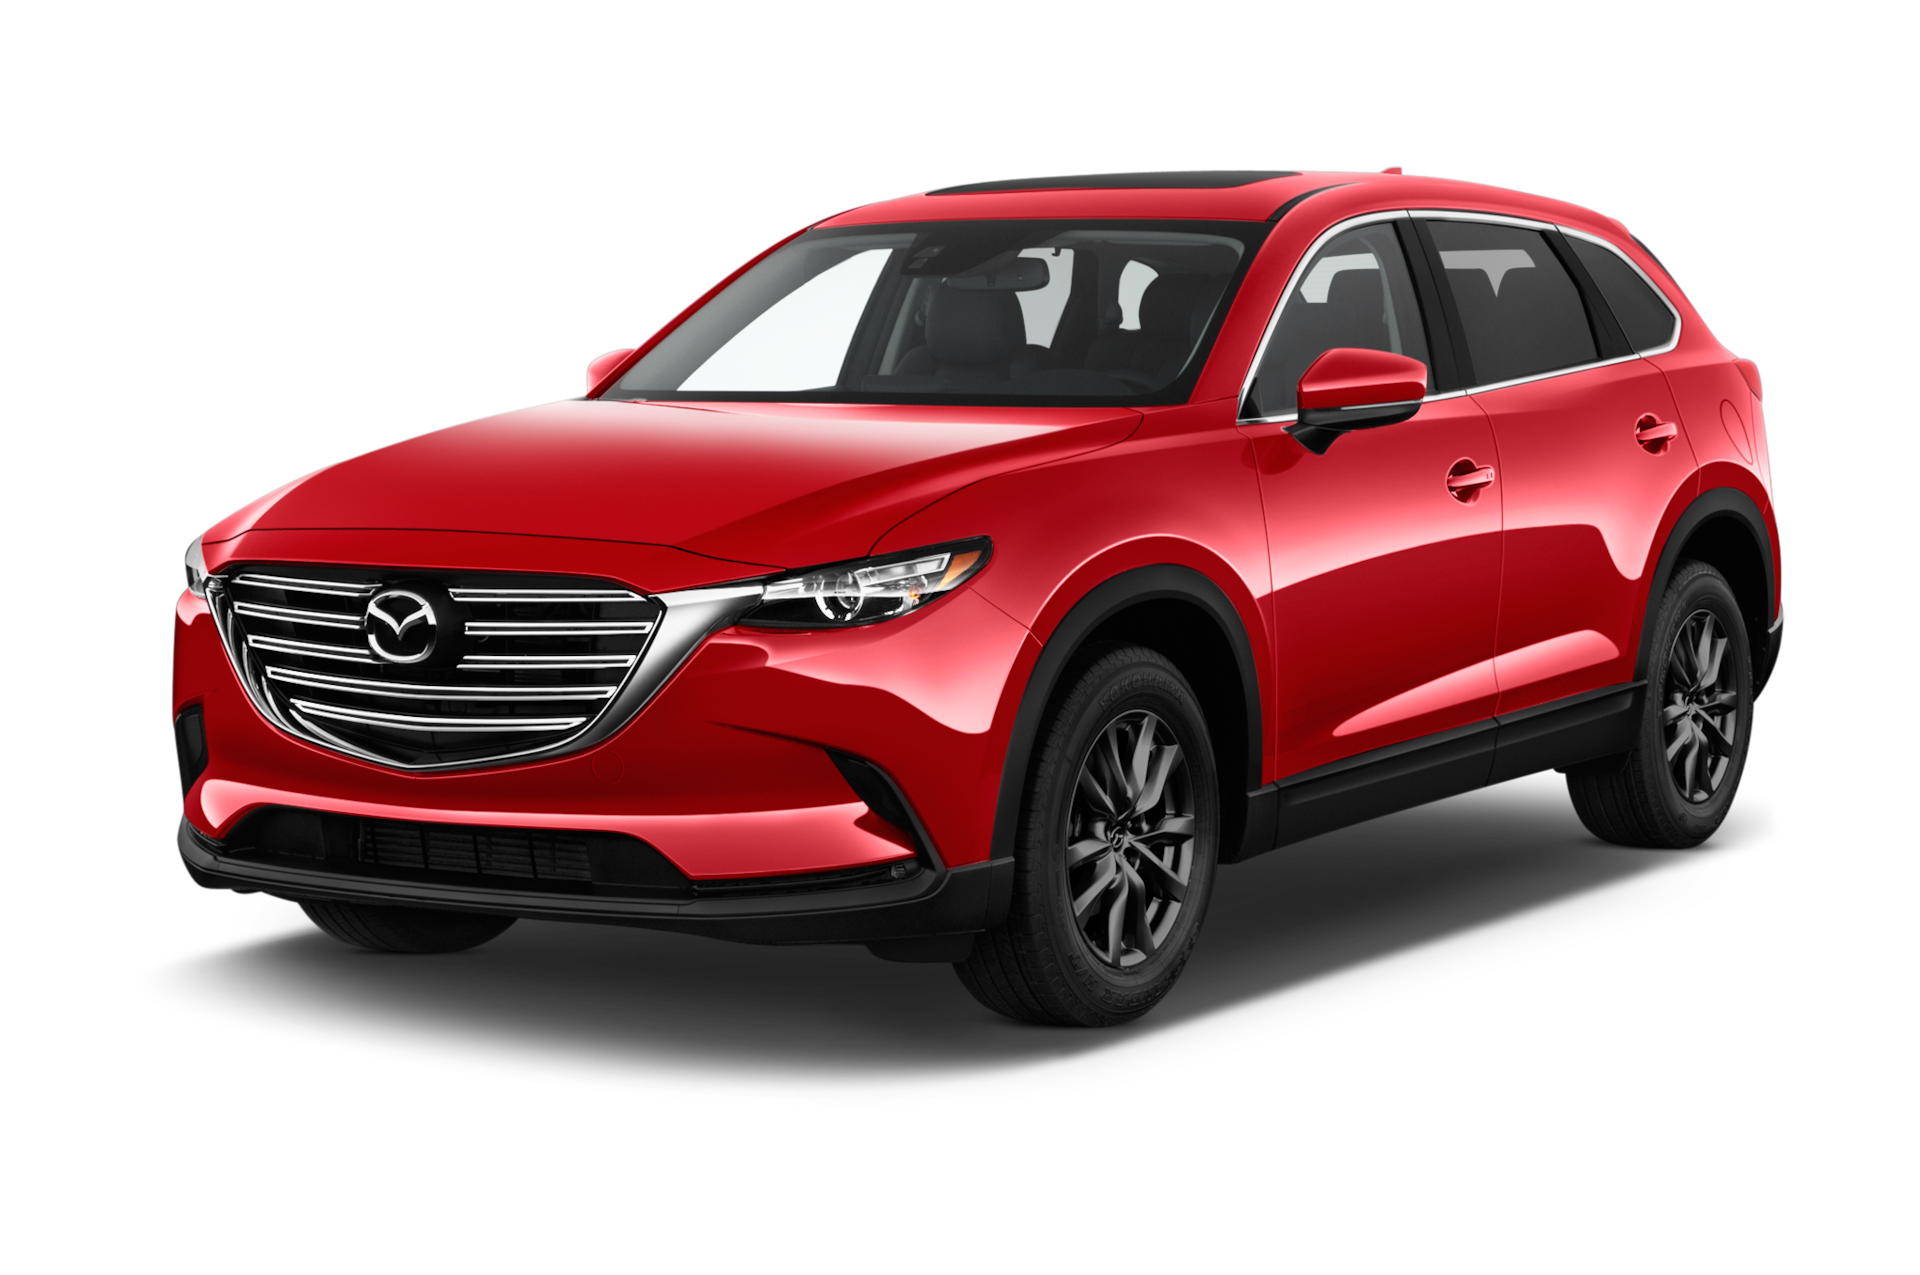 2020 Mazda CX-9 Prices, Reviews, and Photos - MotorTrend